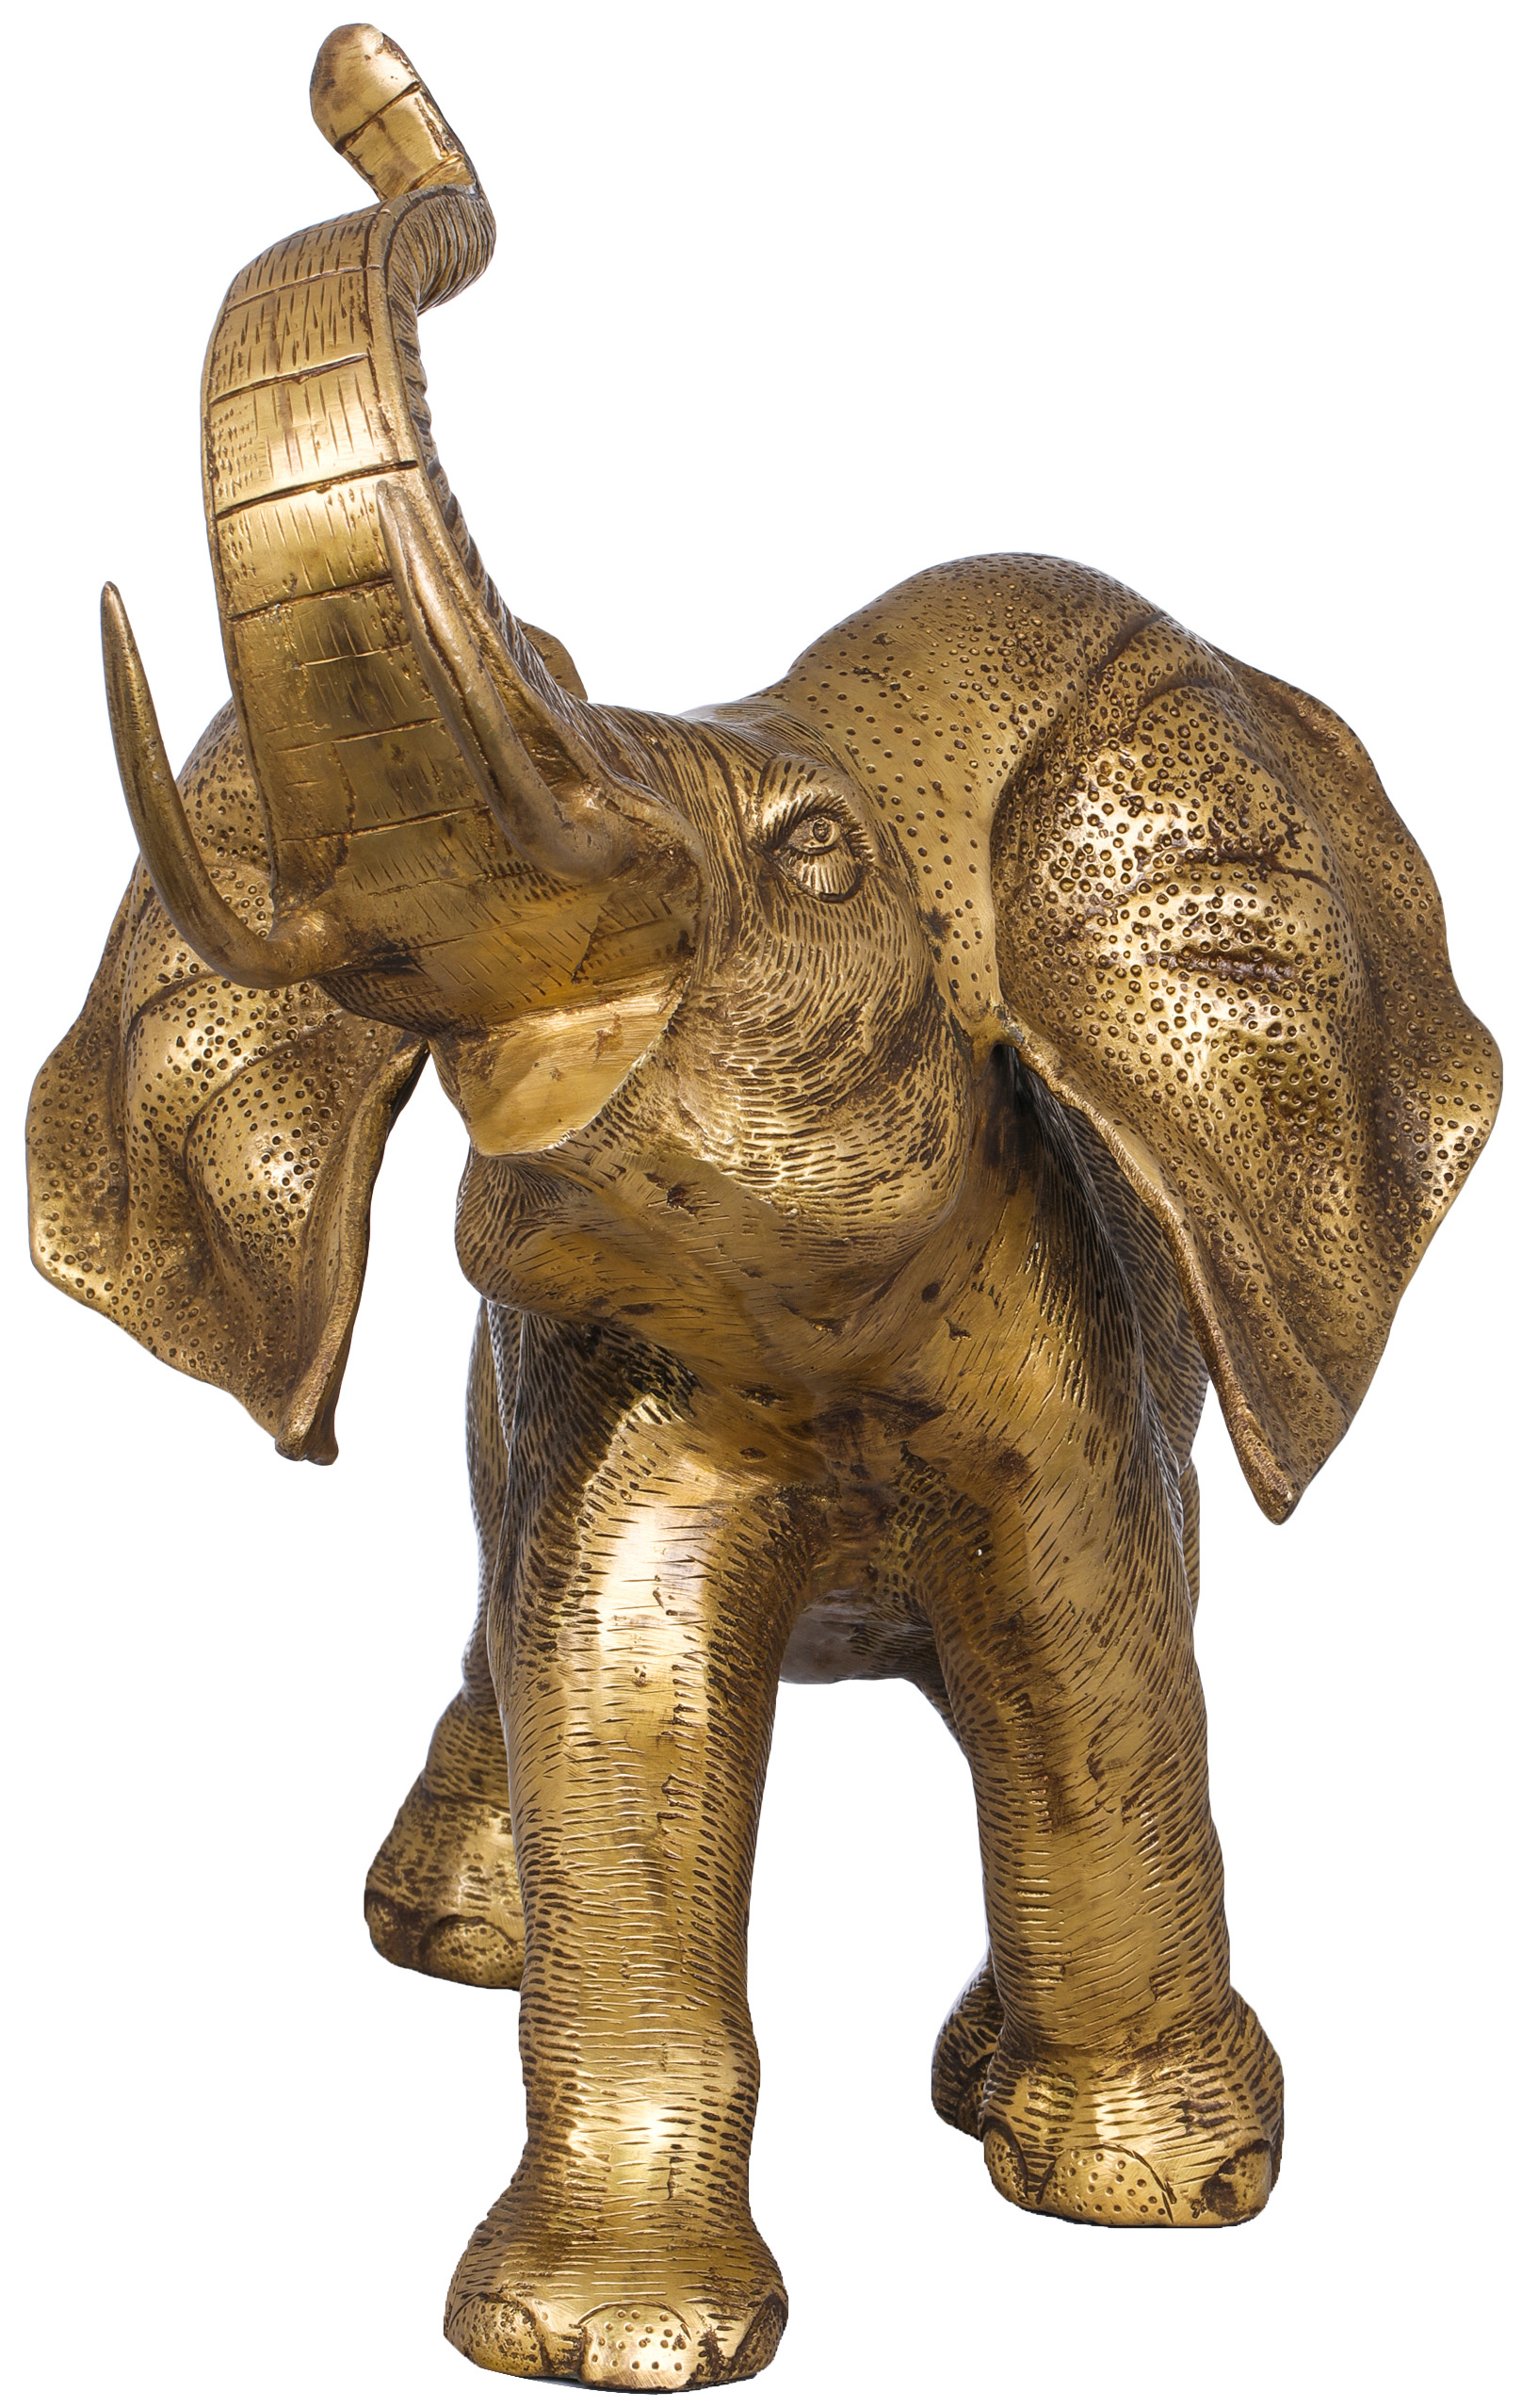 A Young Trumpeting Elephant With Long Tusks